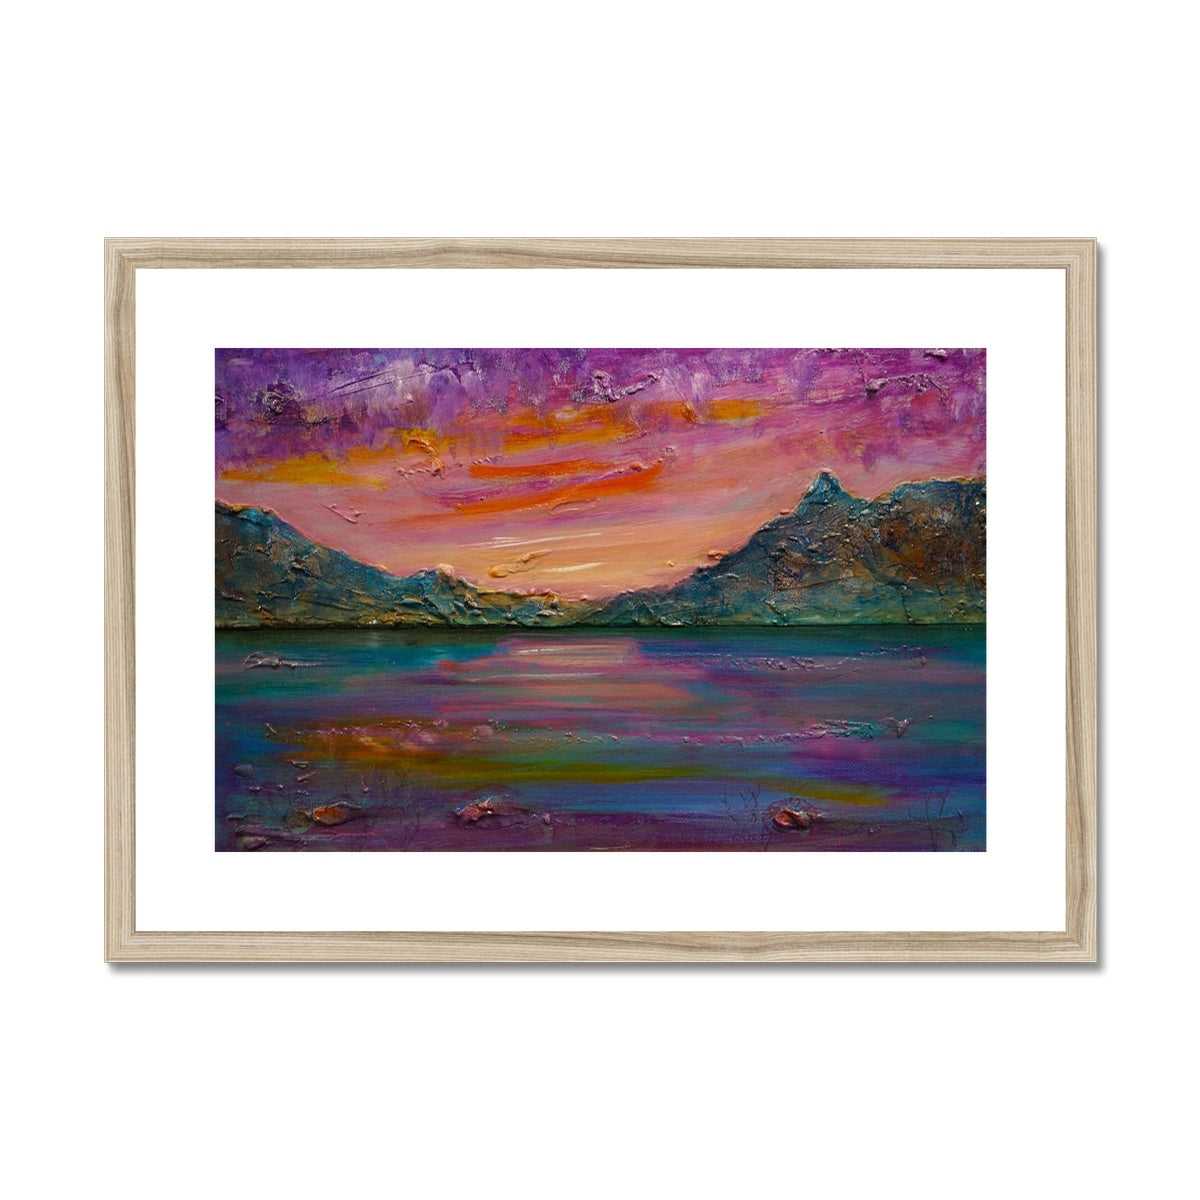 Loch Leven Sunset Painting | Framed & Mounted Prints From Scotland-Framed & Mounted Prints-Scottish Lochs & Mountains Art Gallery-A2 Landscape-Natural Frame-Paintings, Prints, Homeware, Art Gifts From Scotland By Scottish Artist Kevin Hunter